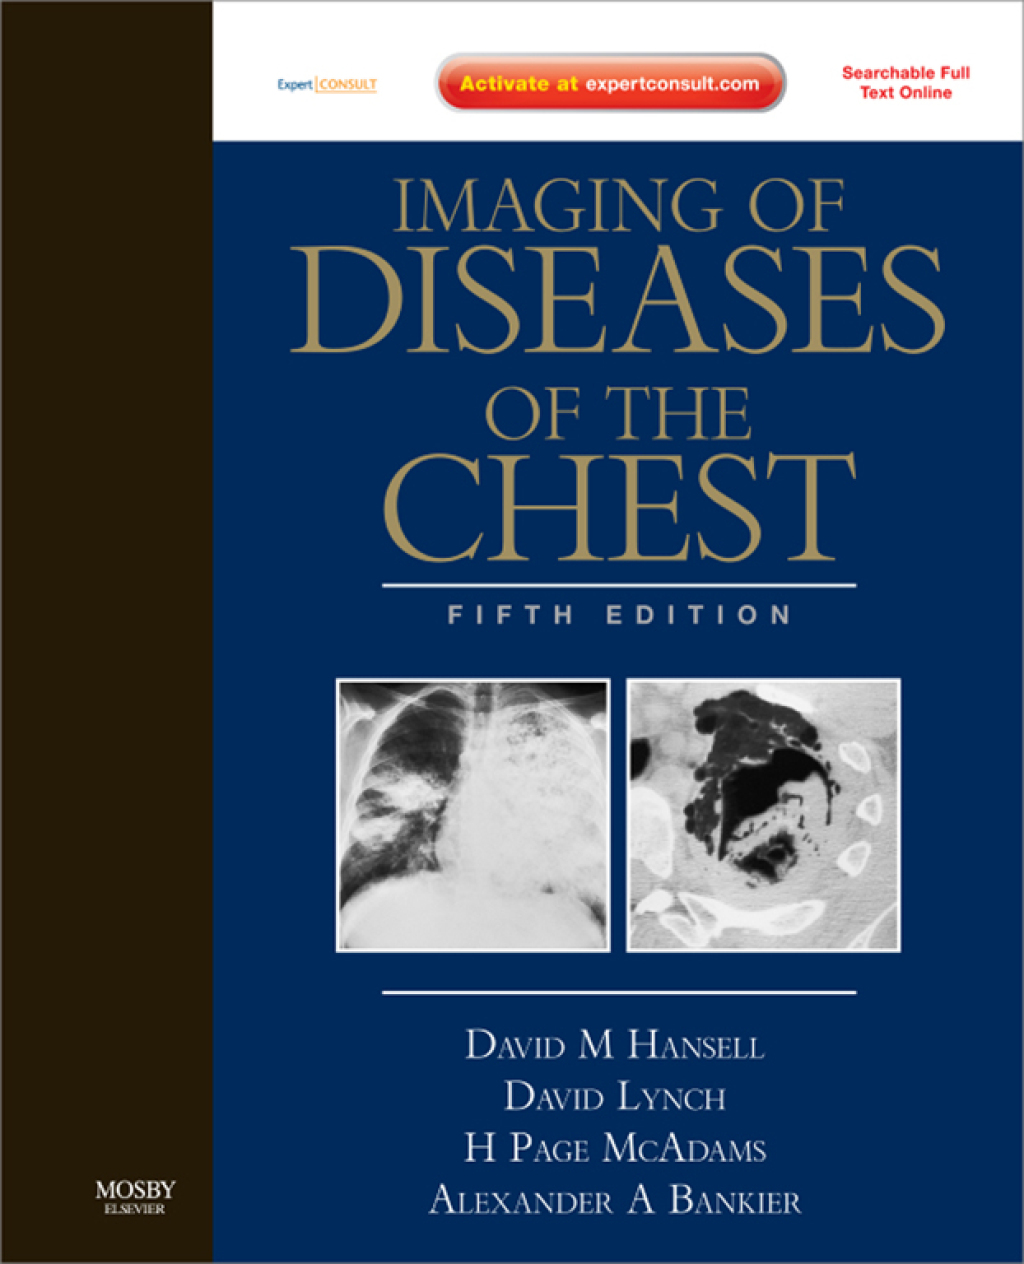 Imaging of Diseases of the Chest - 5th Edition (eBook Rental)